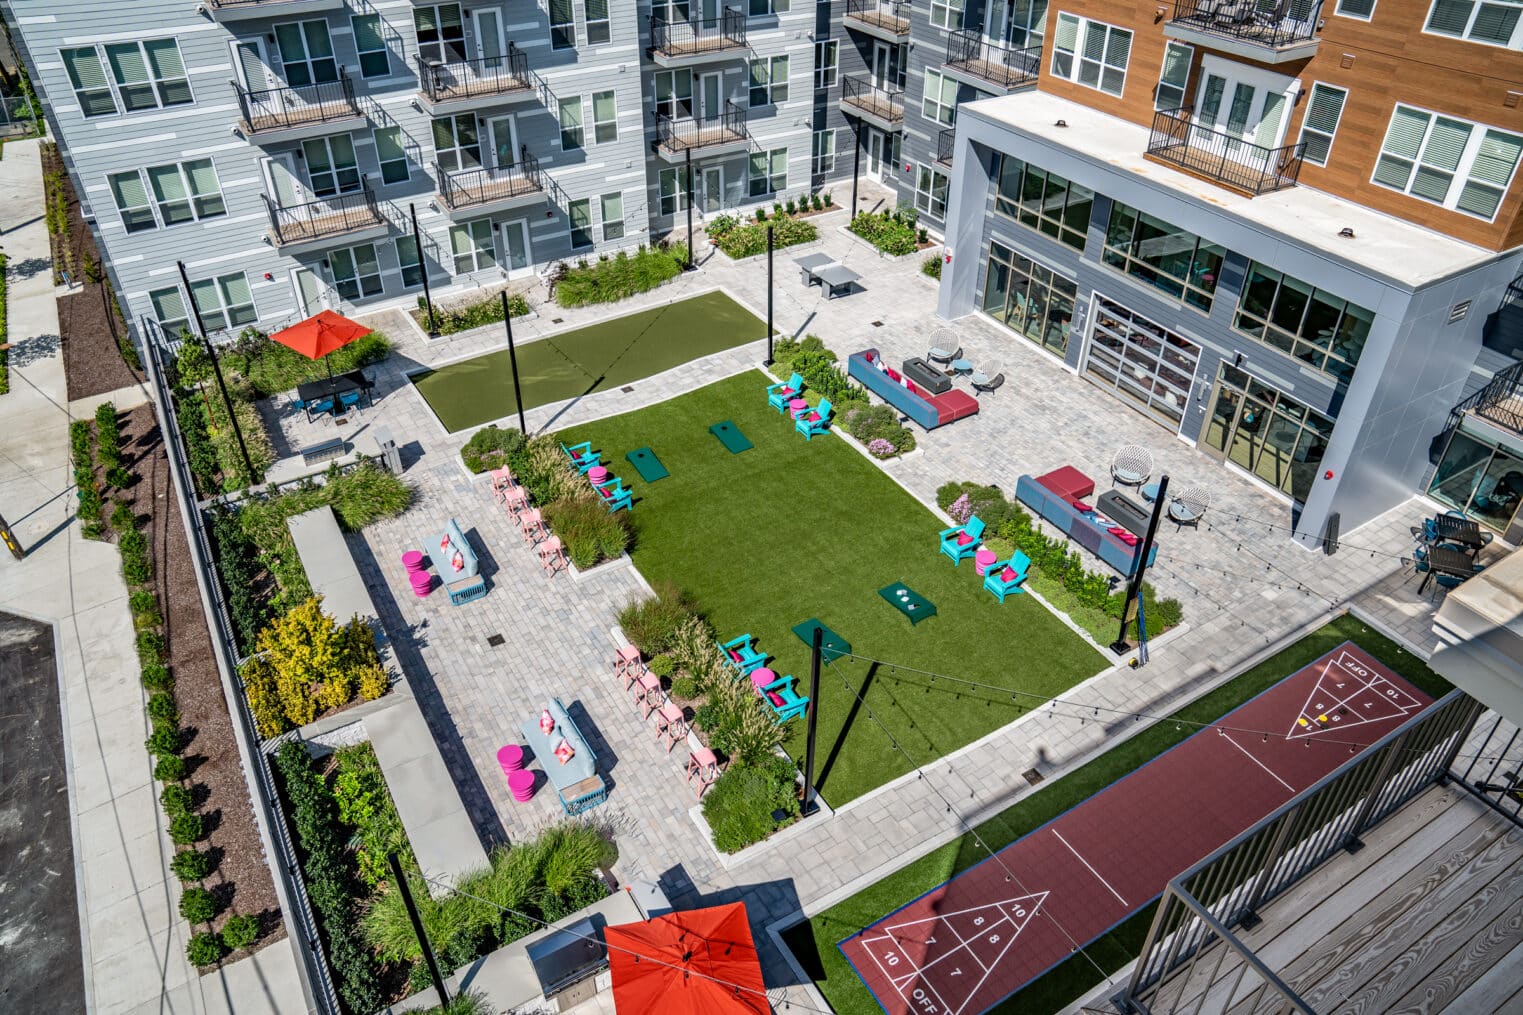 The 3rd floor central courtyard, built by Dex by Terra, at V2 Apartments in Chelsea, Massachusetts.